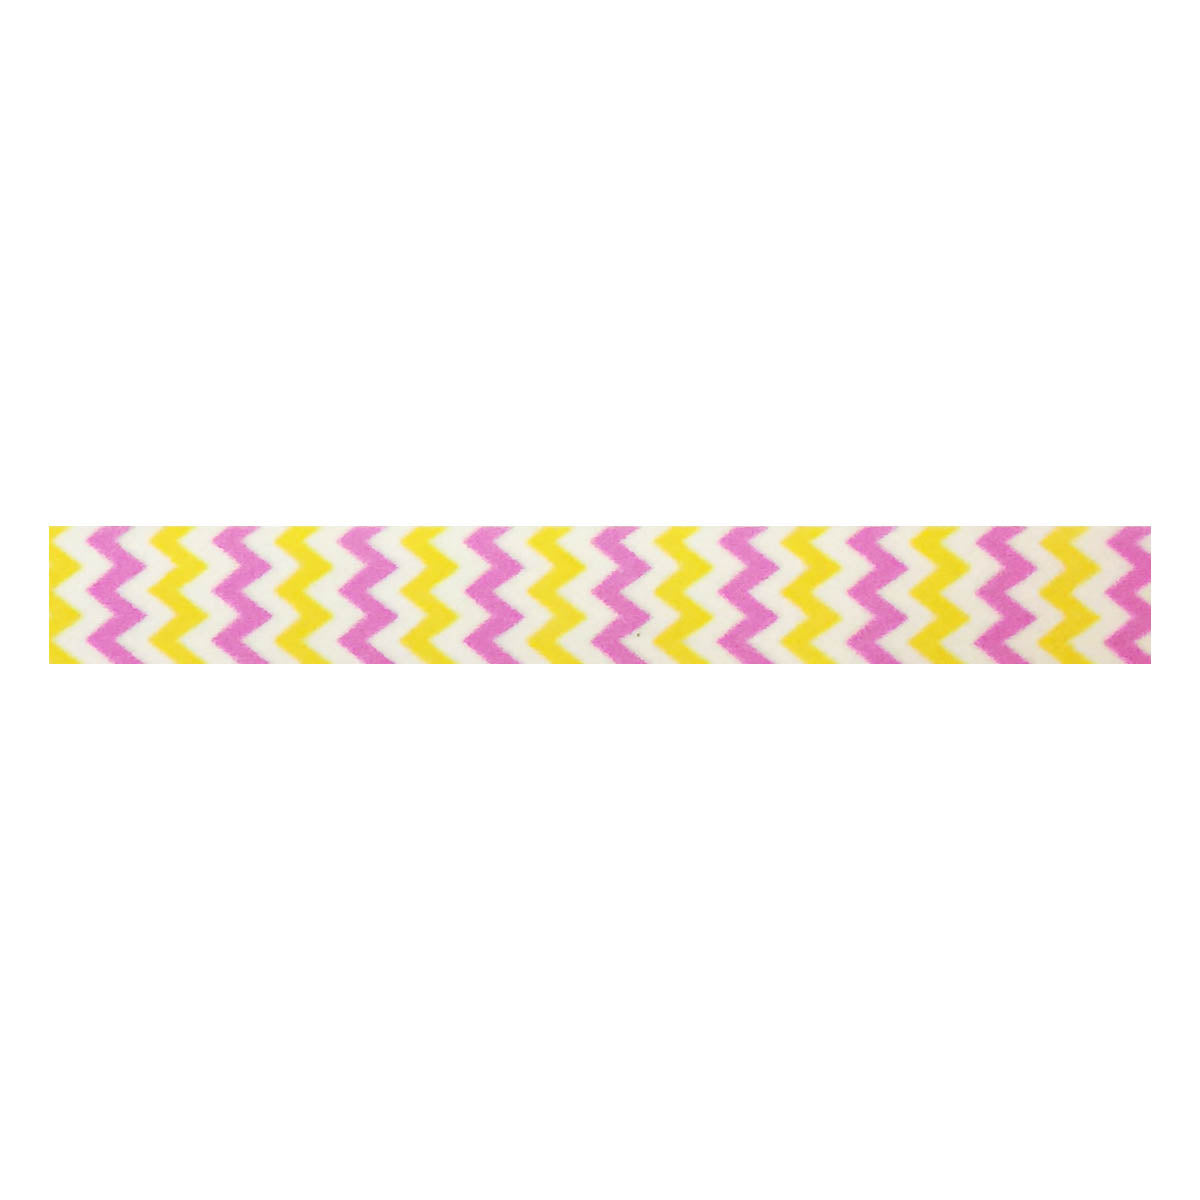 Wrapables Washi Masking Tape, Cute and Colorful Group